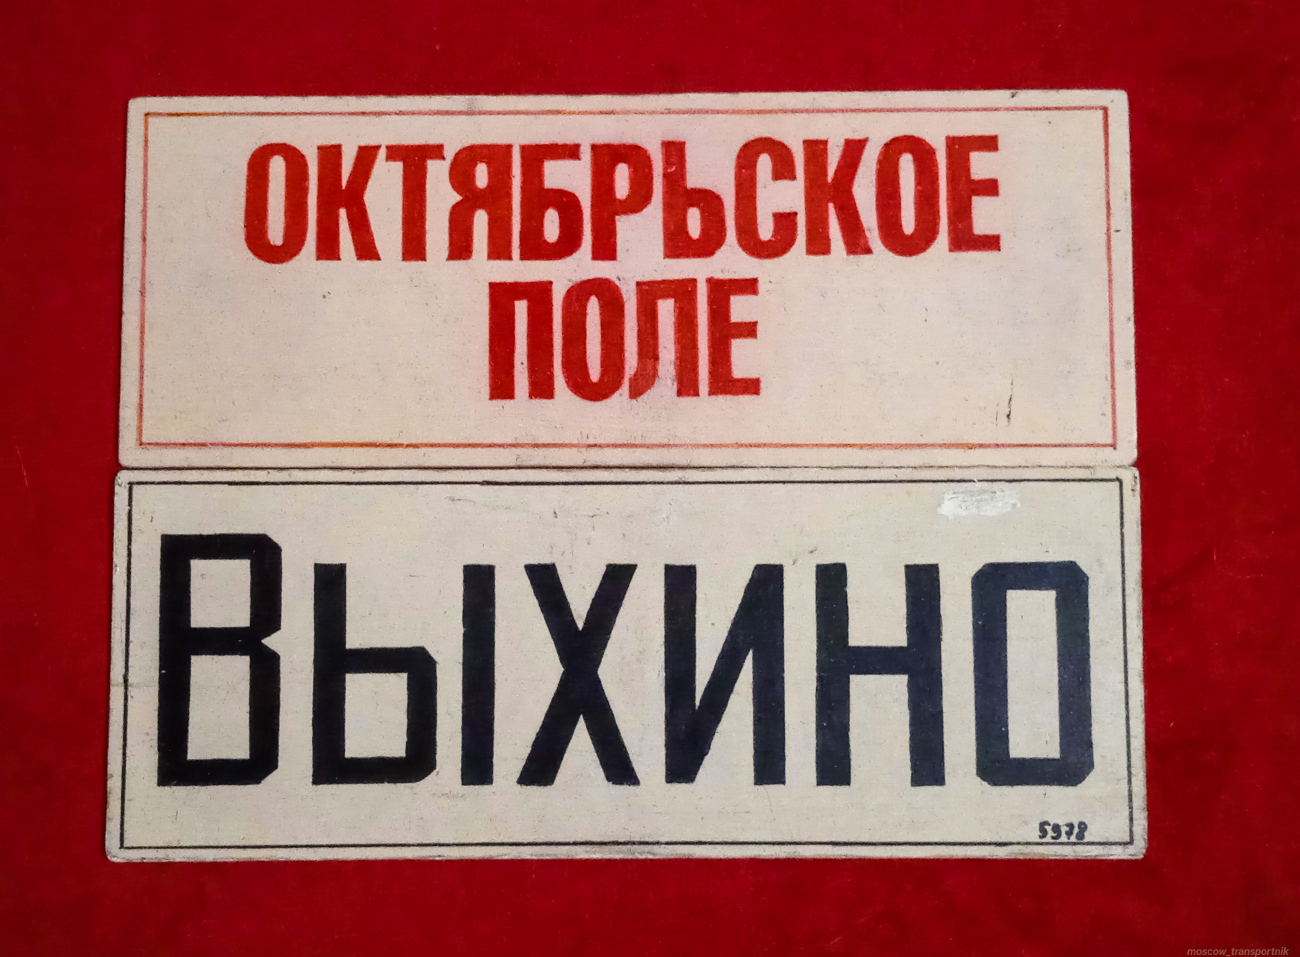 Moscow — Route boards for vehicles